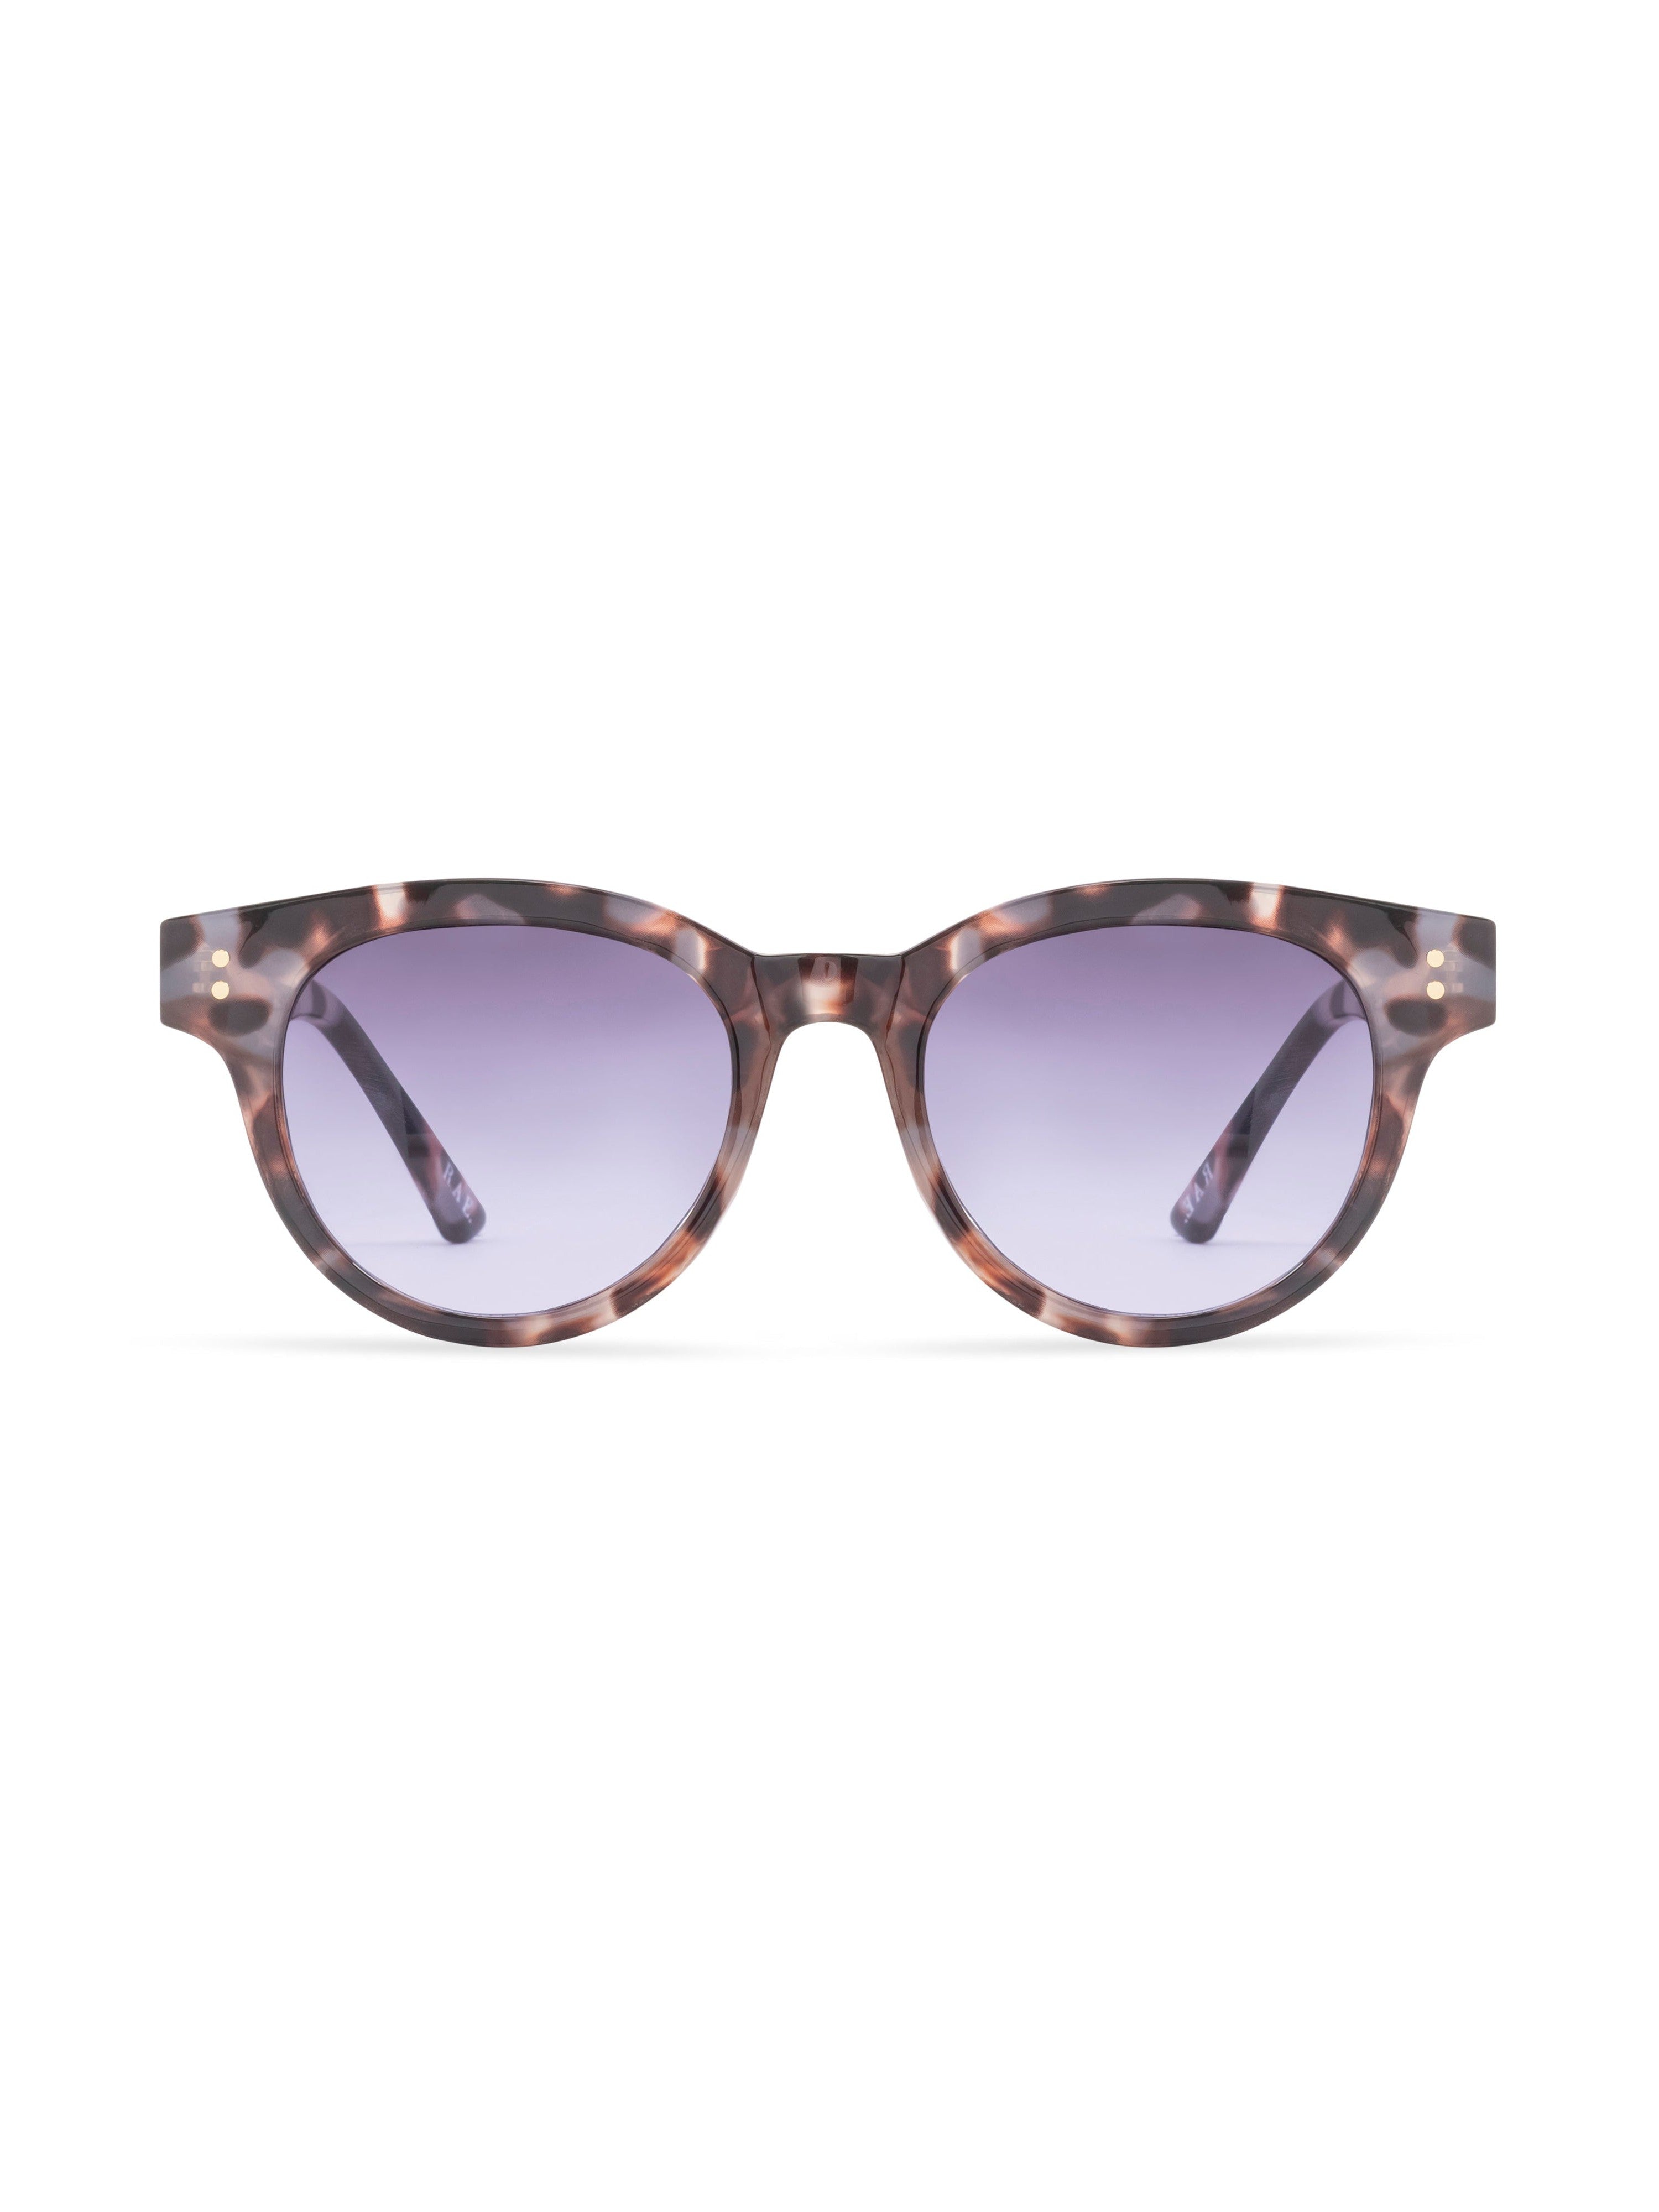 WENDY Premium Sunglasses with "SHINE ON" Signature Font - Rae Dunn Wear